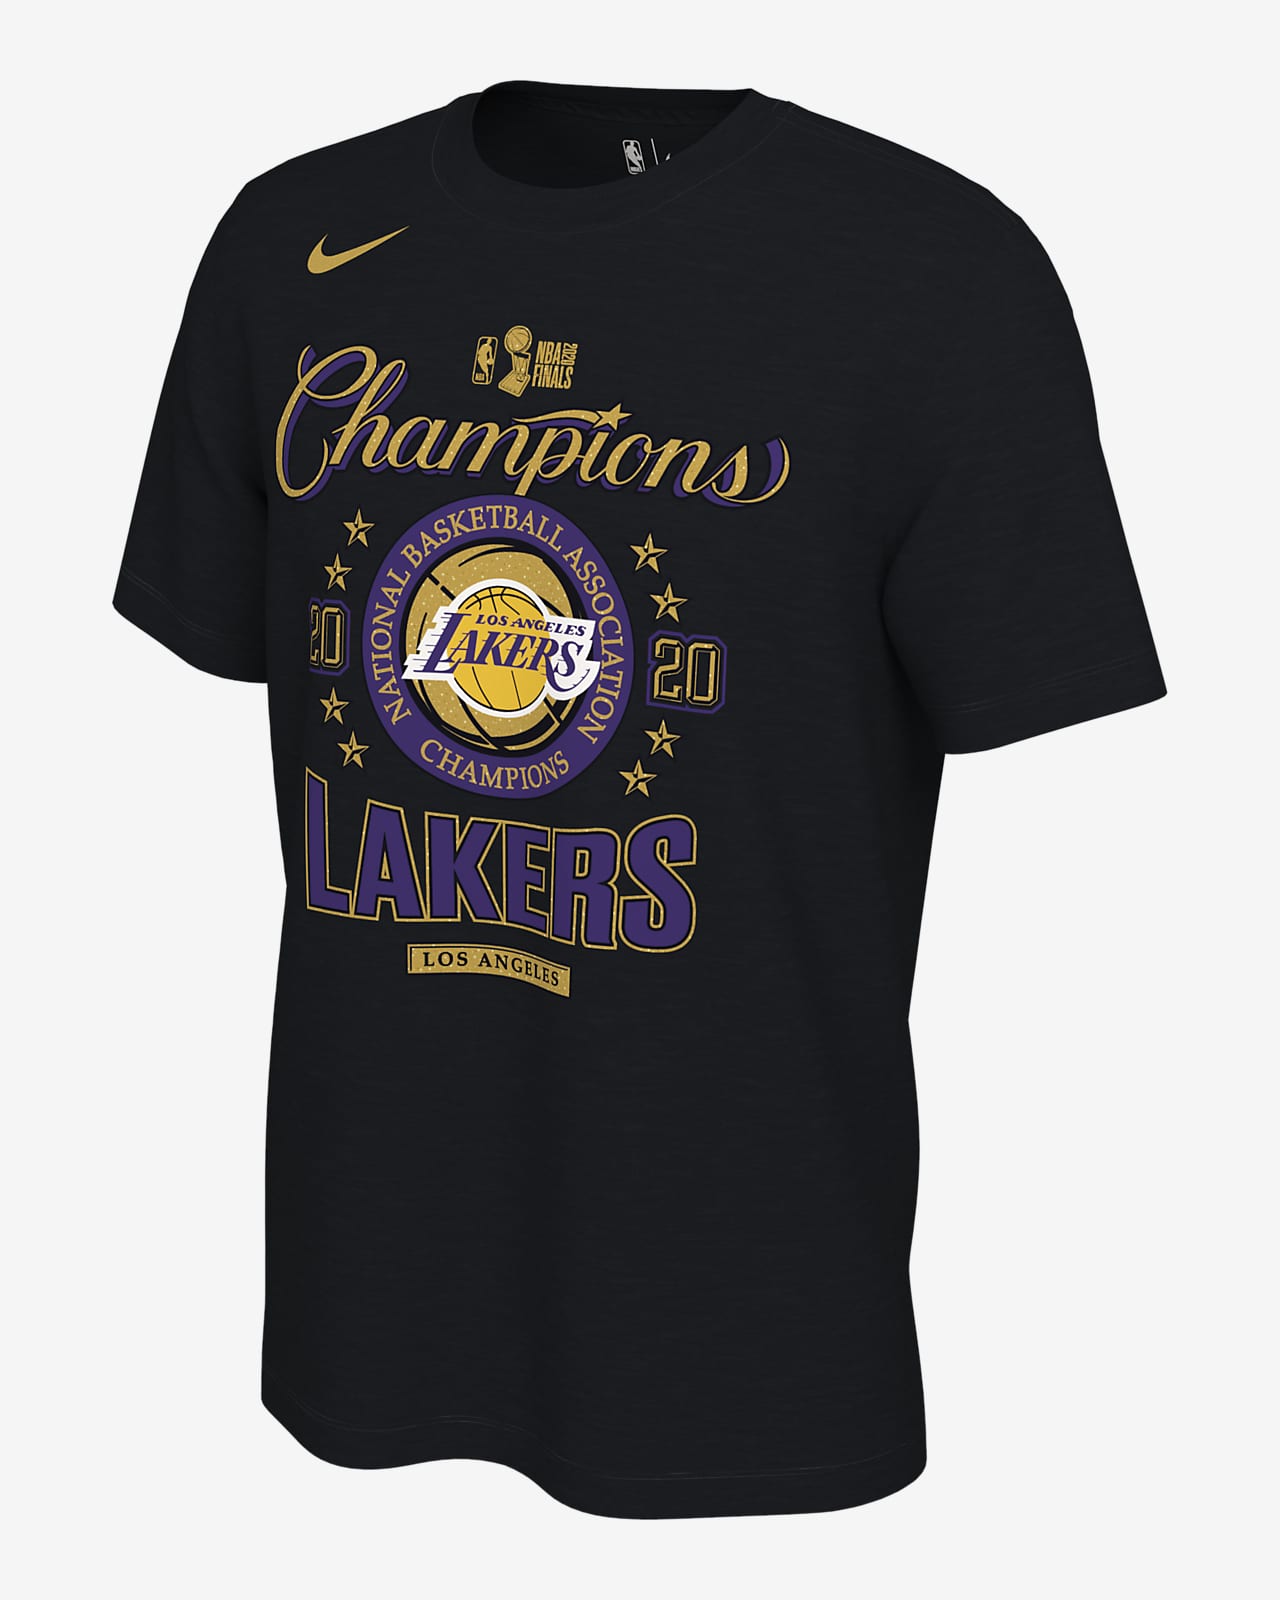 the lakers shirt